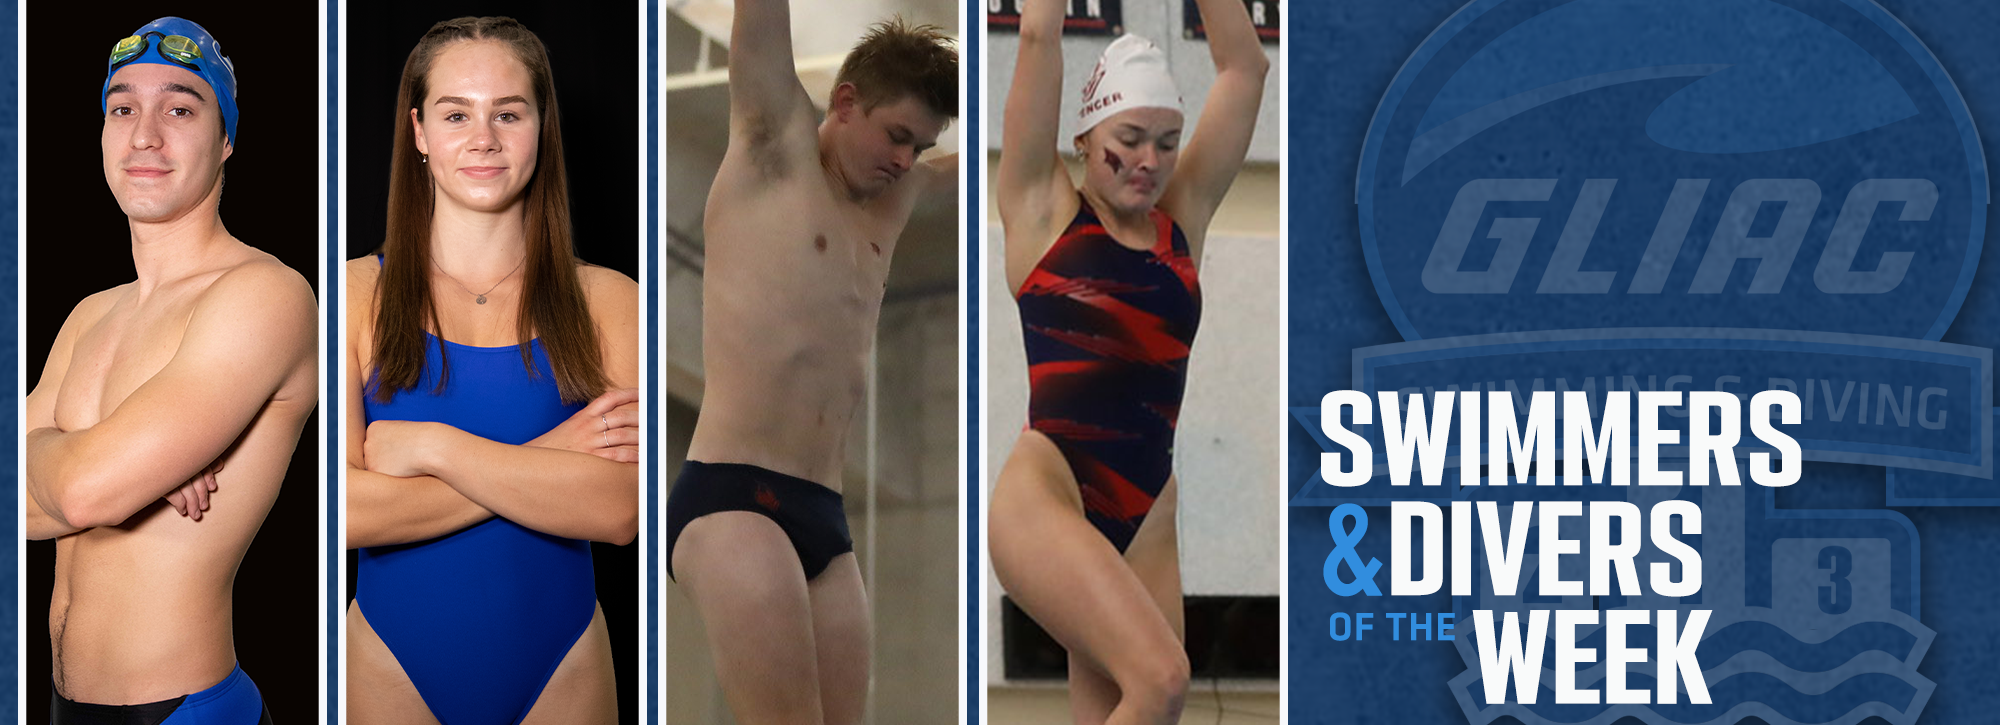 GLIAC recognizes men's and women's swimmers and divers of the week